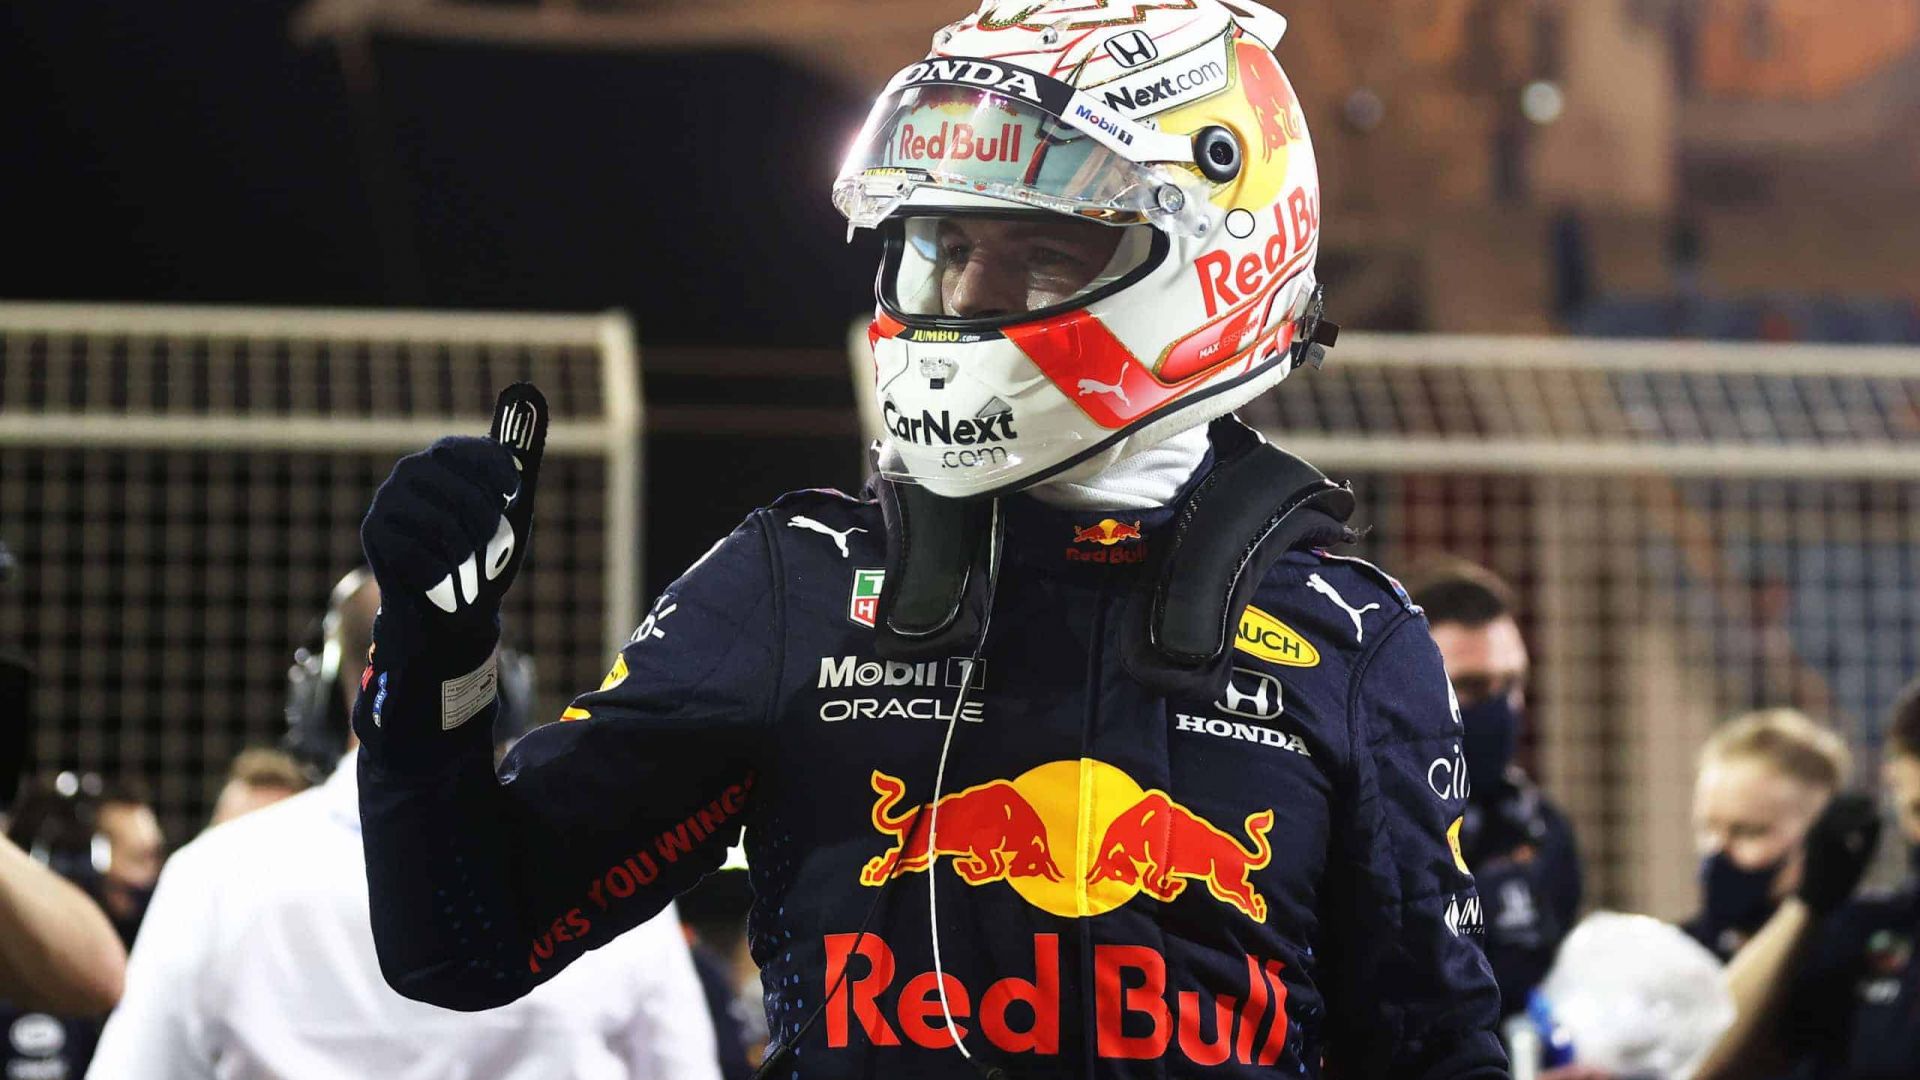 BAHRAIN GP, BAHRAIN - MARCH 27: Pole position qualifier Max Verstappen of Netherlands and Red Bull Racing celebrates in parc ferme during qualifying ahead of the F1 Grand Prix of Bahrain at Bahrain International Circuit on March 27, 2021 in Bahrain, Bahrain. (Photo by Lars Baron/Getty Images) // Getty Images / Red Bull Content Pool // SI202103270340 // Usage for editorial use only //